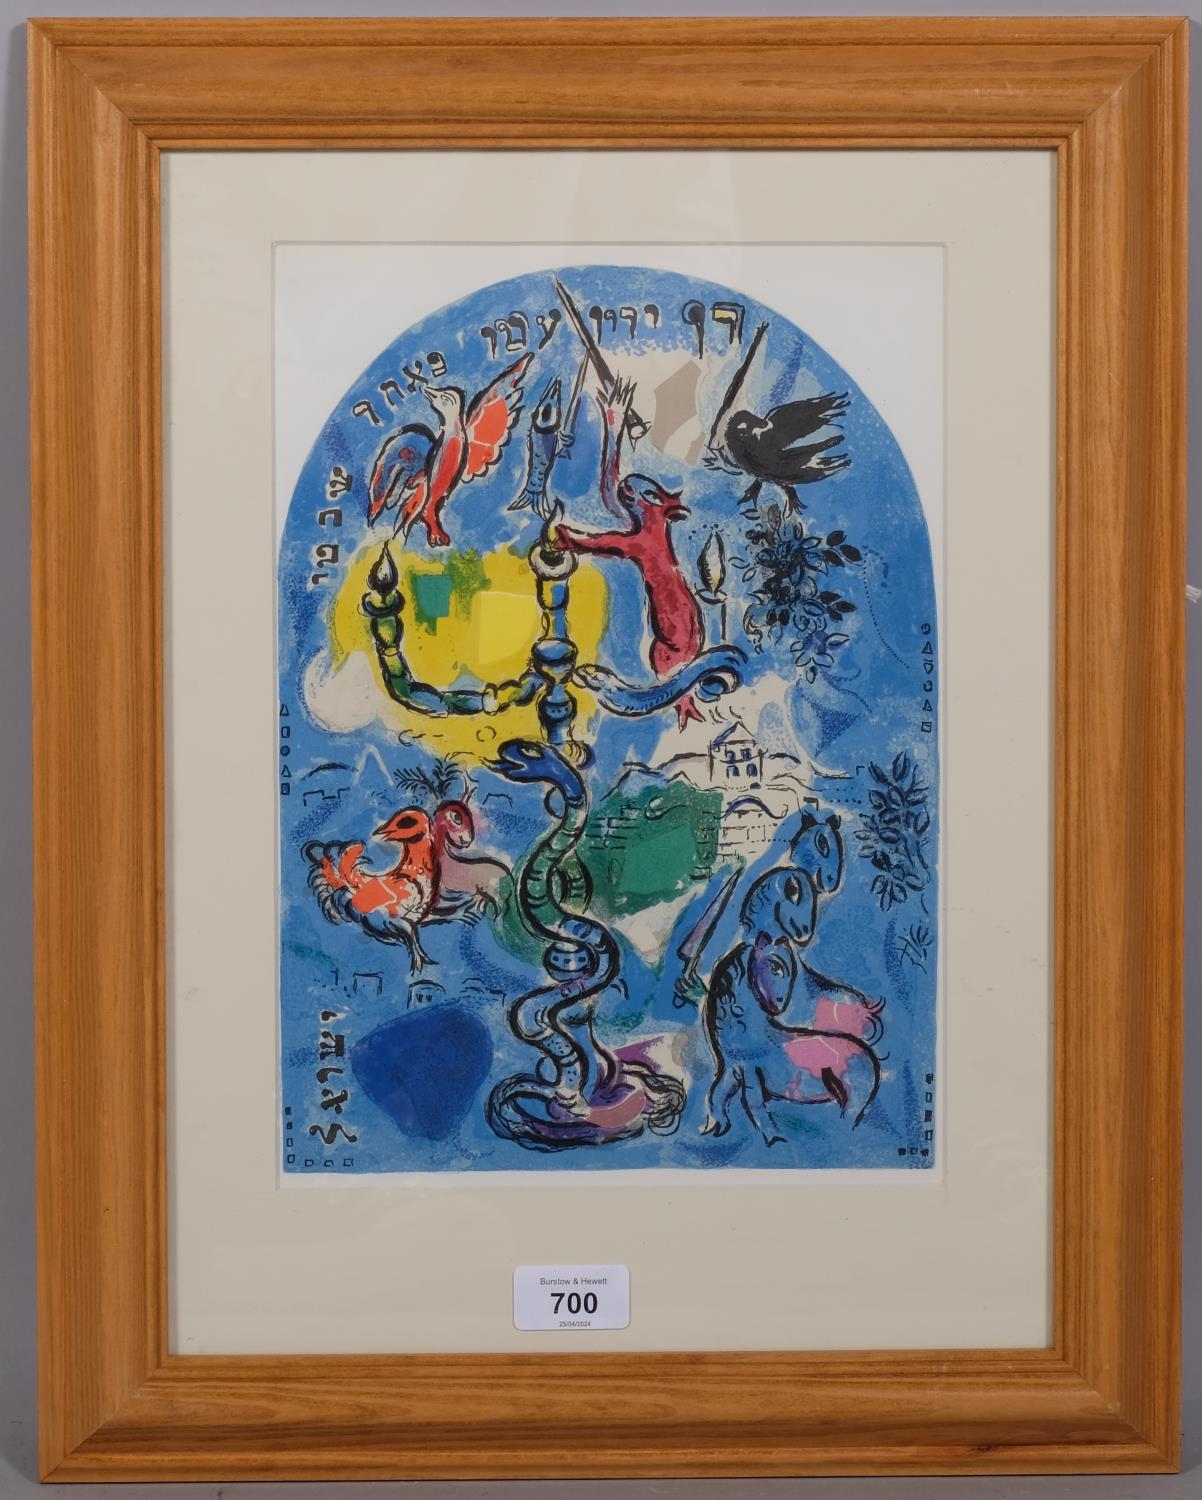 Marc Chagall/C Sorlier, window design, lithograph 1962, small version, image 29cm x 21cm, framed - Image 2 of 4